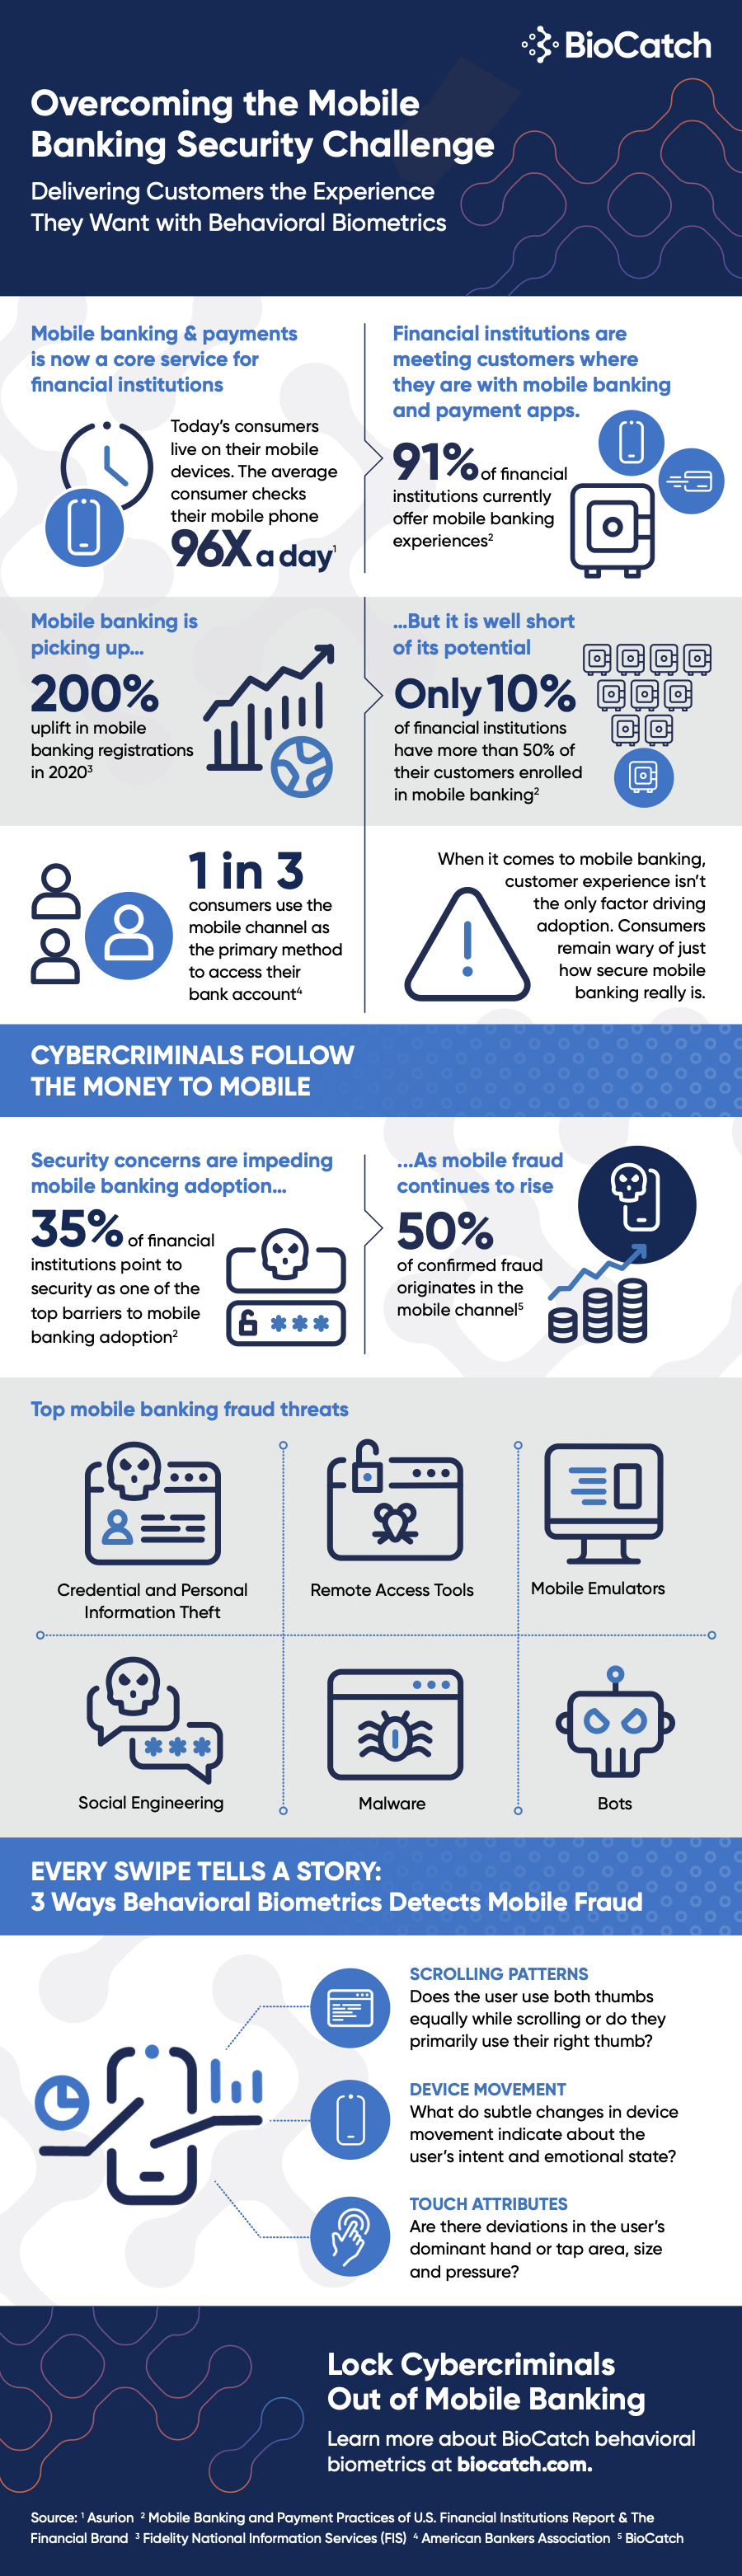 Lock Cybercriminals Out of Mobile Banking with Behavioral Biometrics featured image